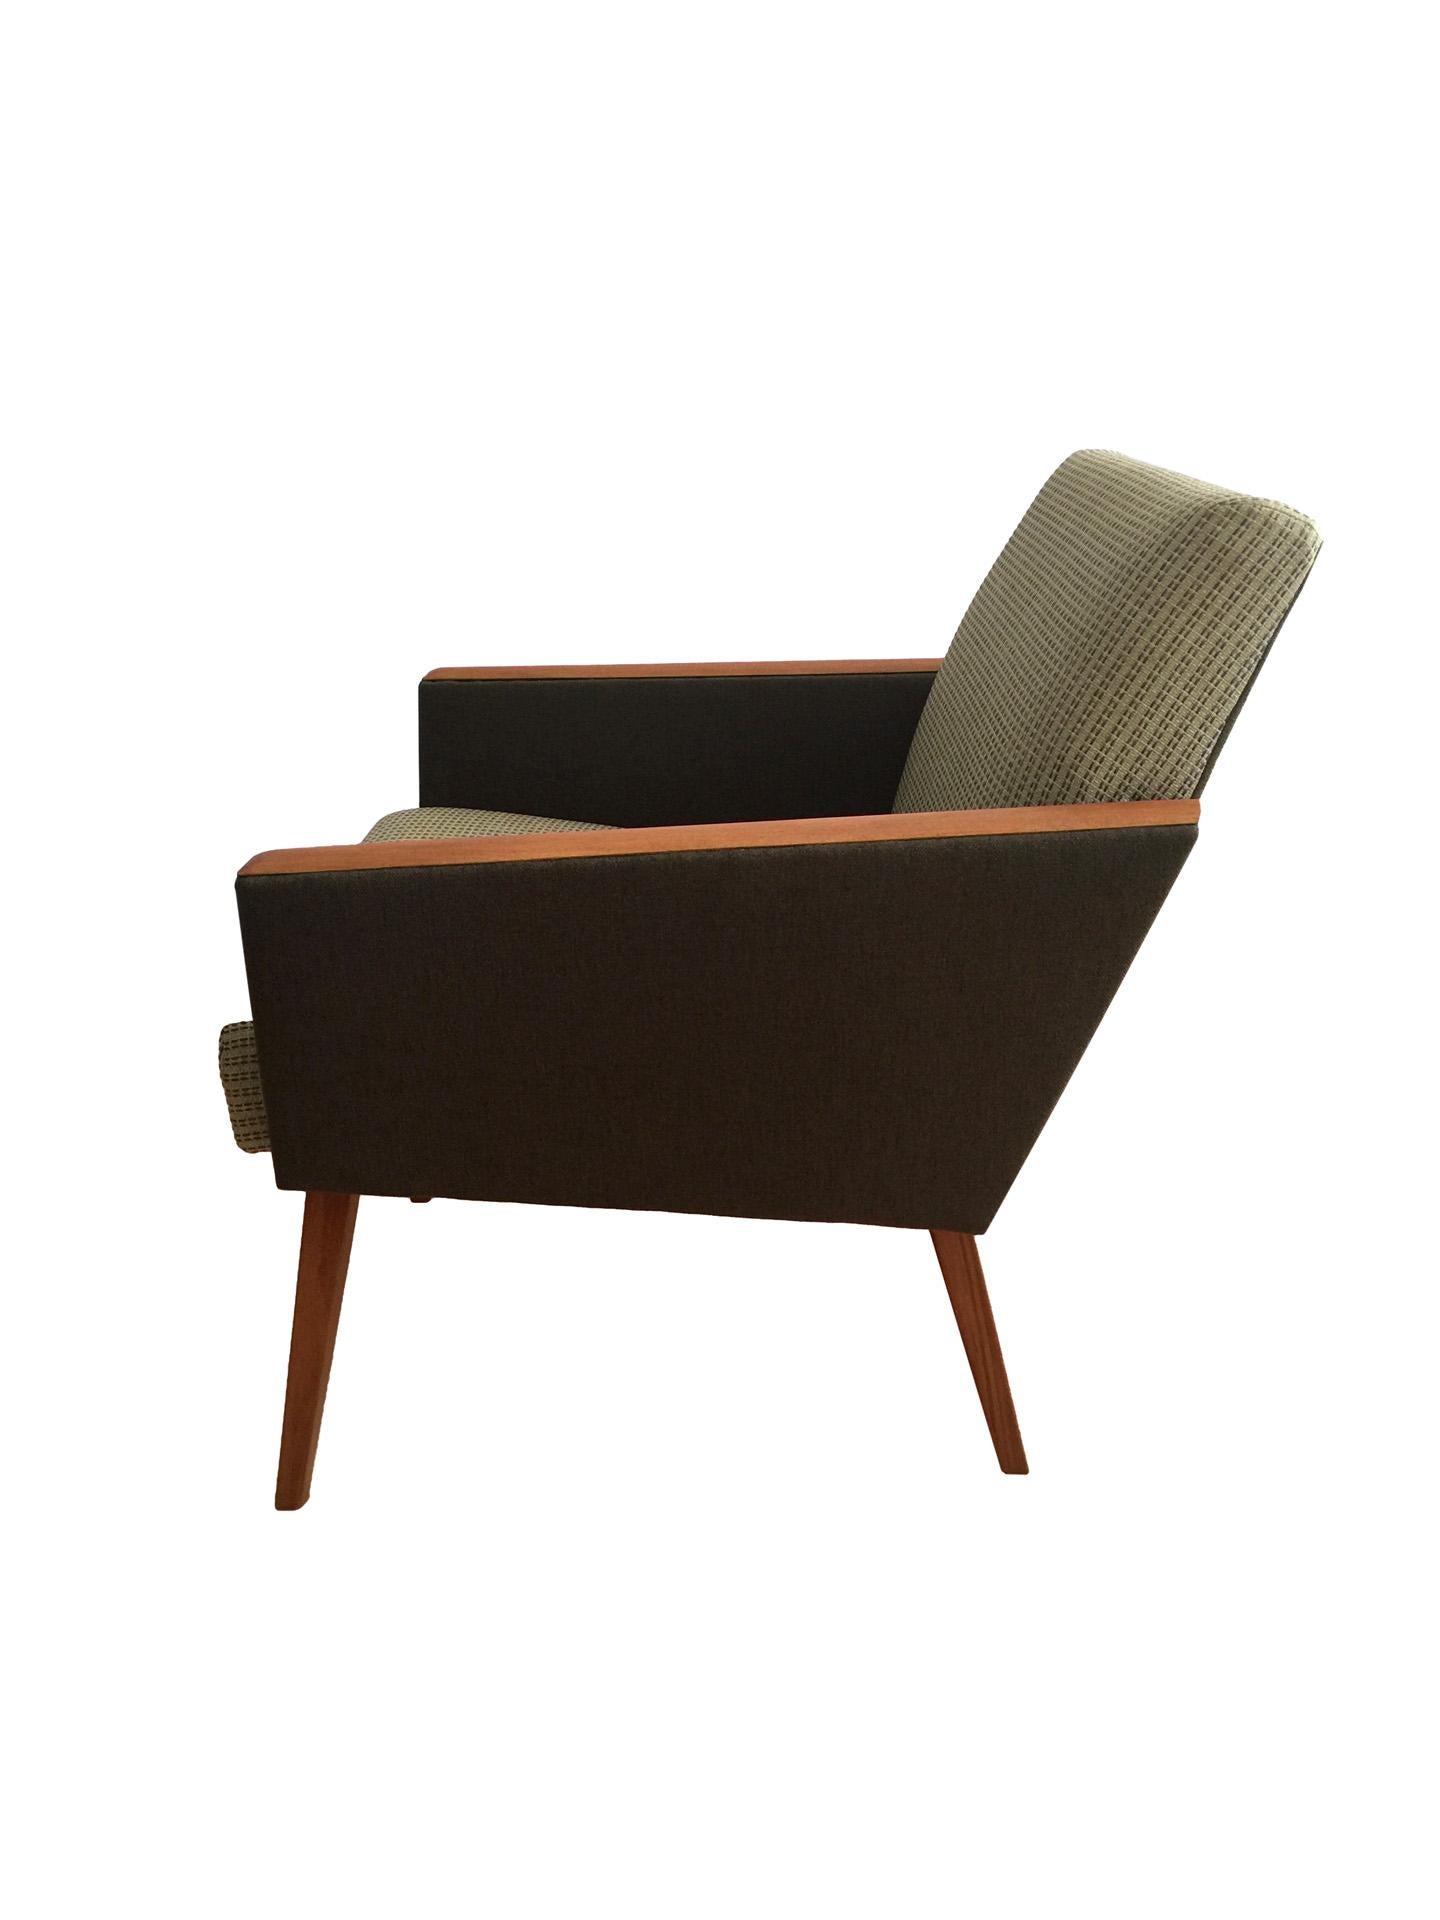 German Mid-Century Modern Lounge Armchair in Olive, 1970s For Sale